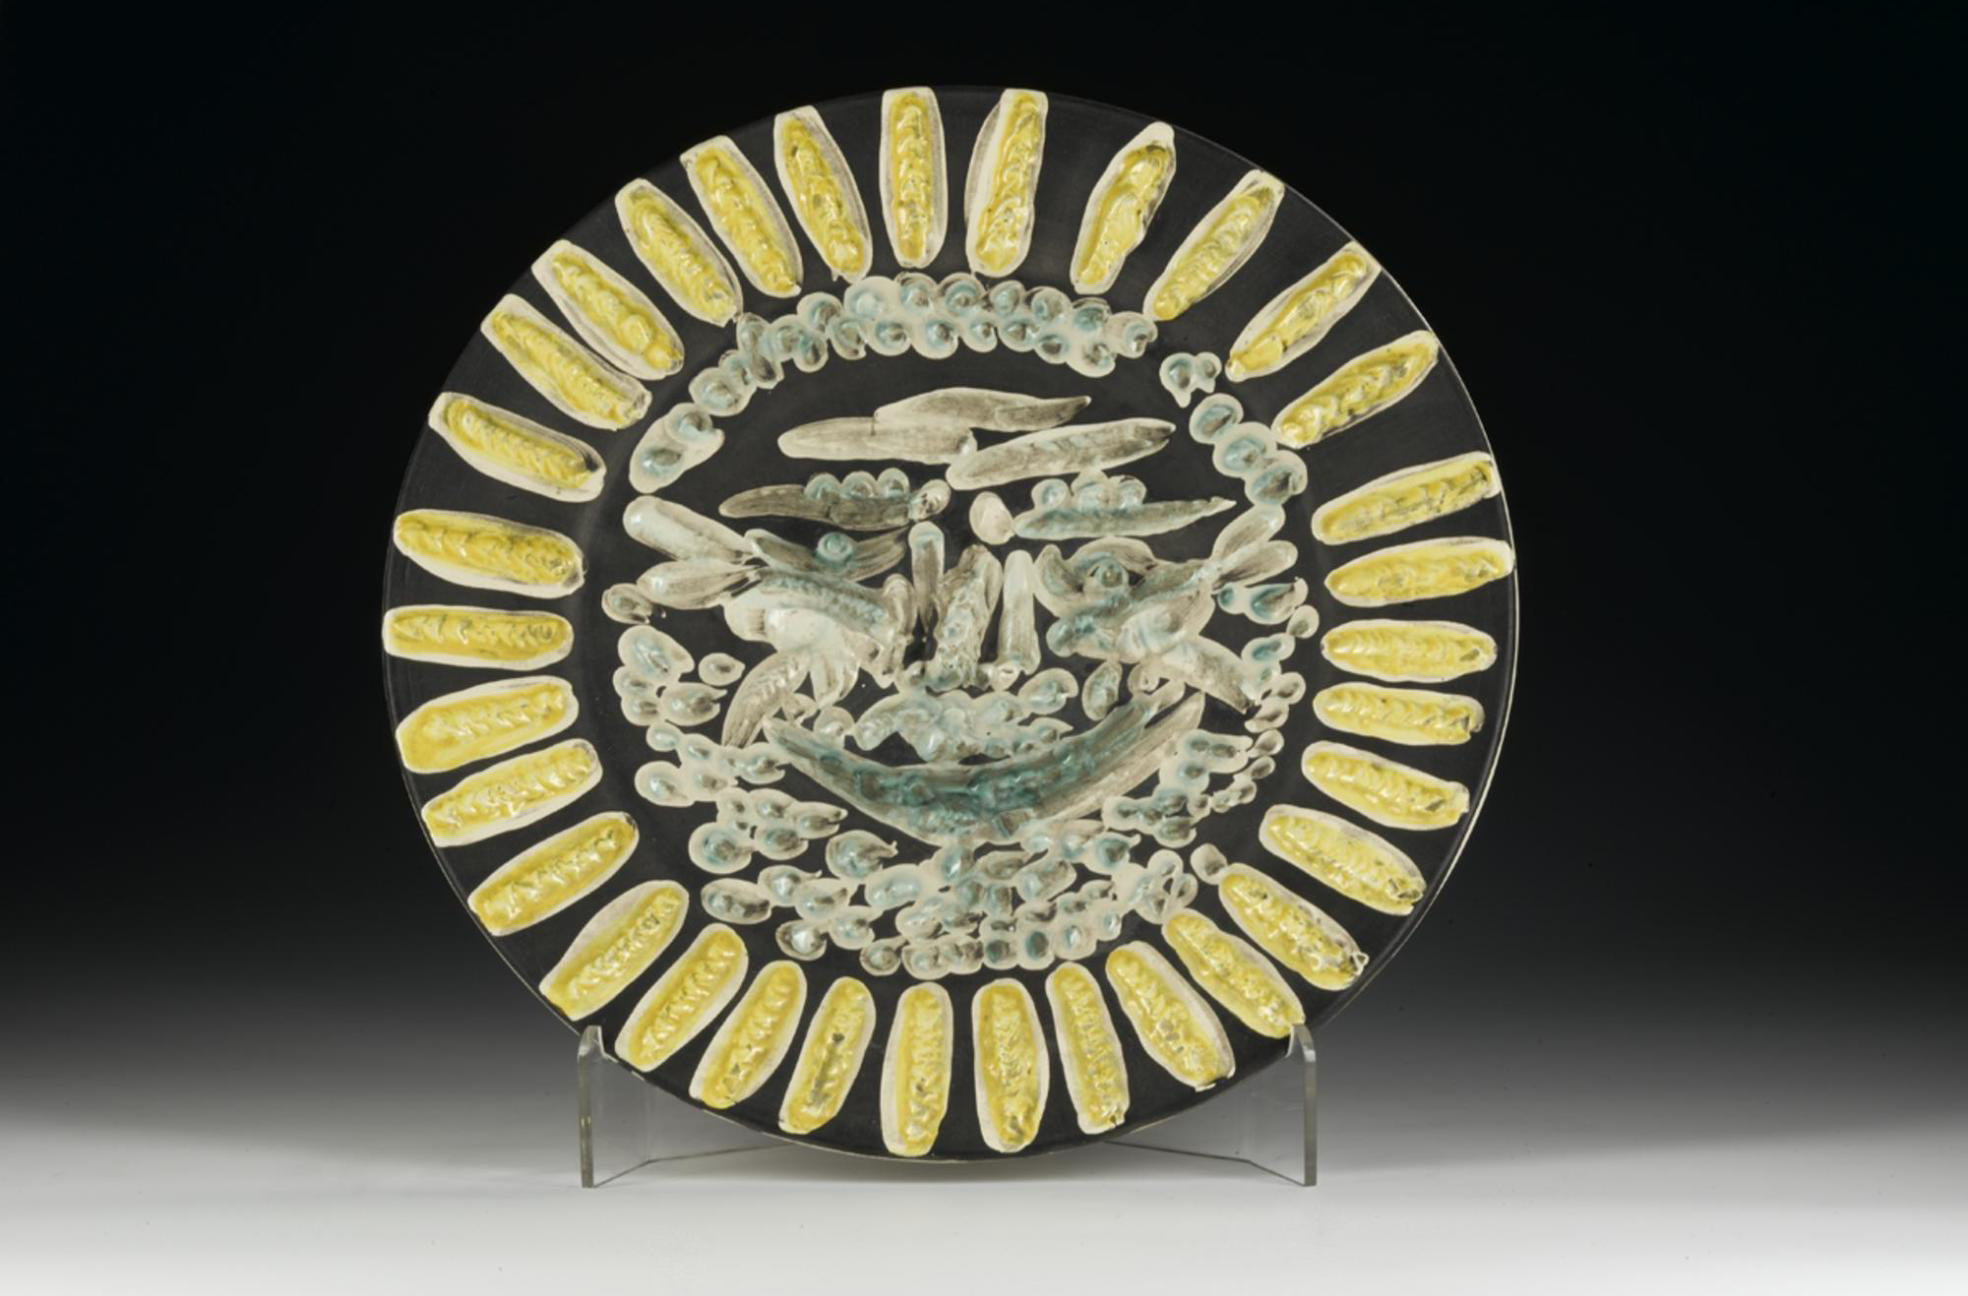 Ceramic dish entitled 'Visage Tourmente', designed by Pablo Picasso in the 1950s